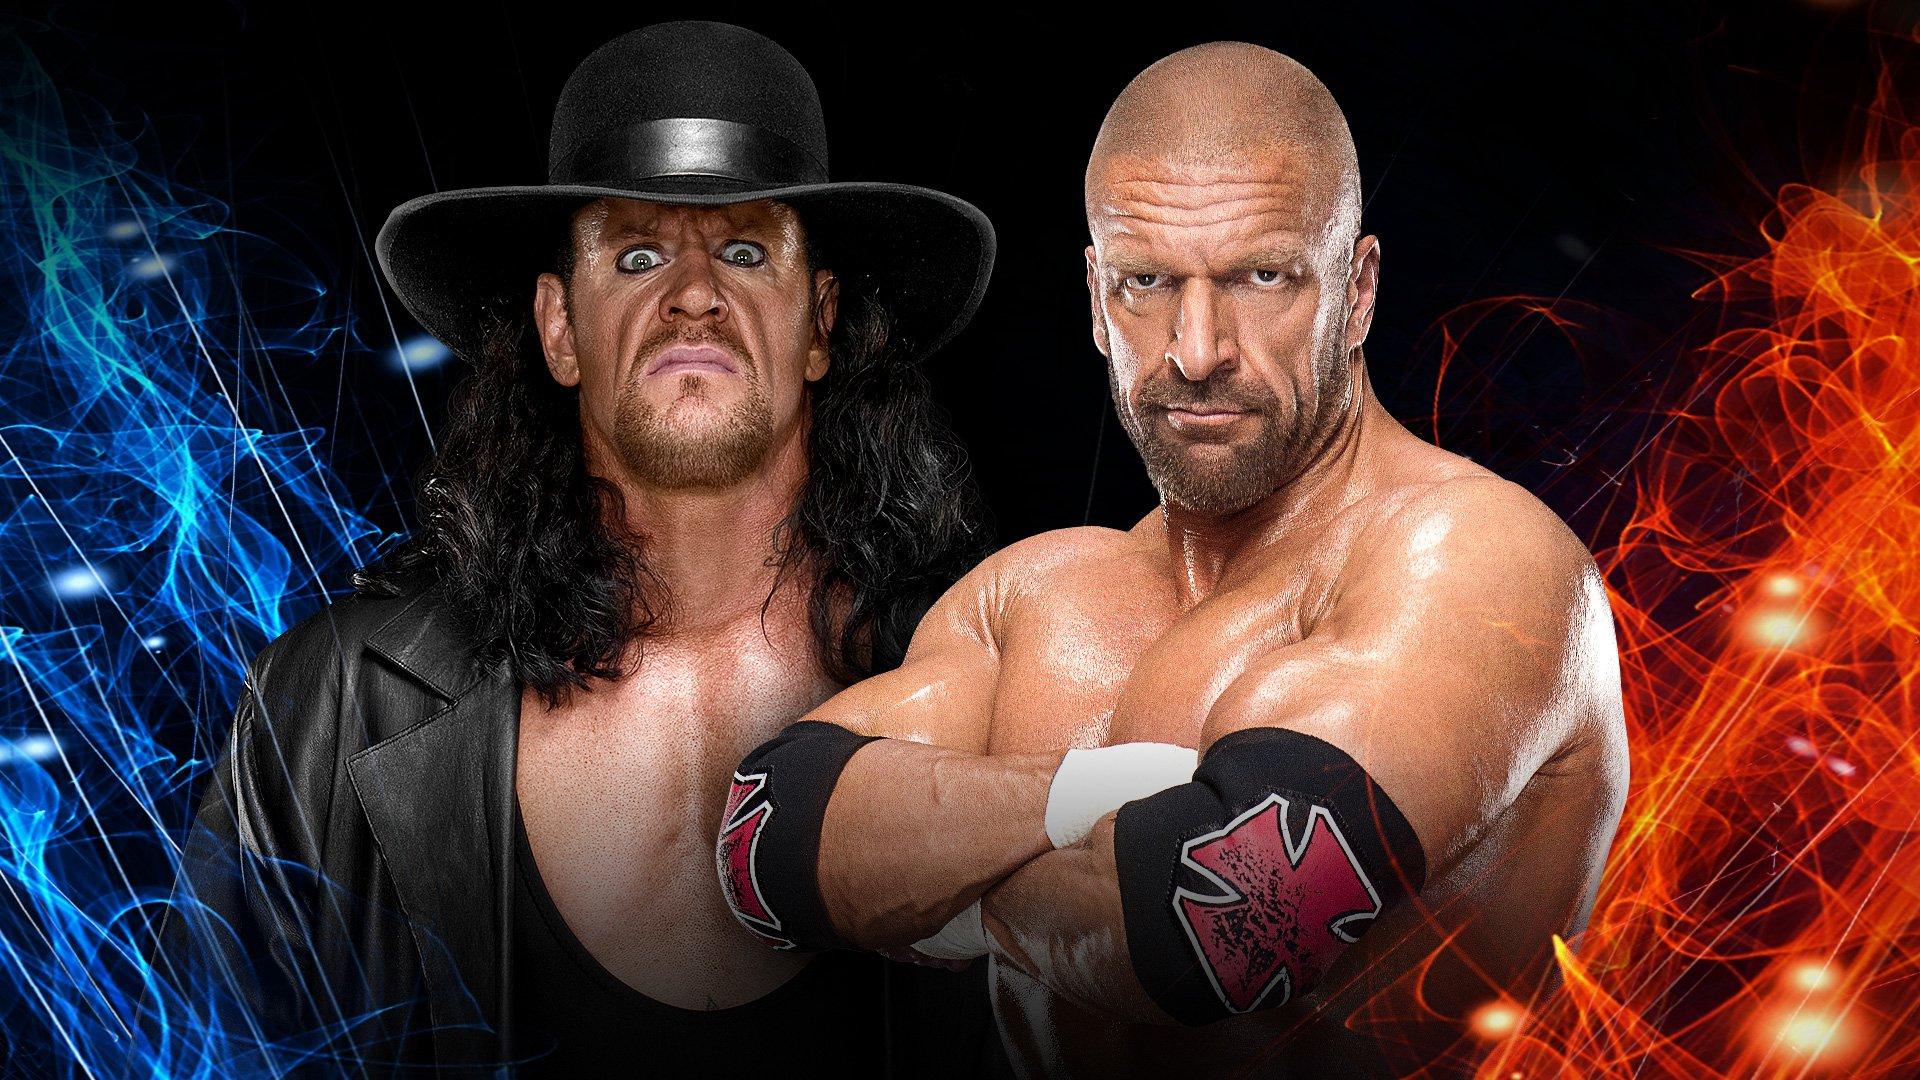 Triple H and Taker